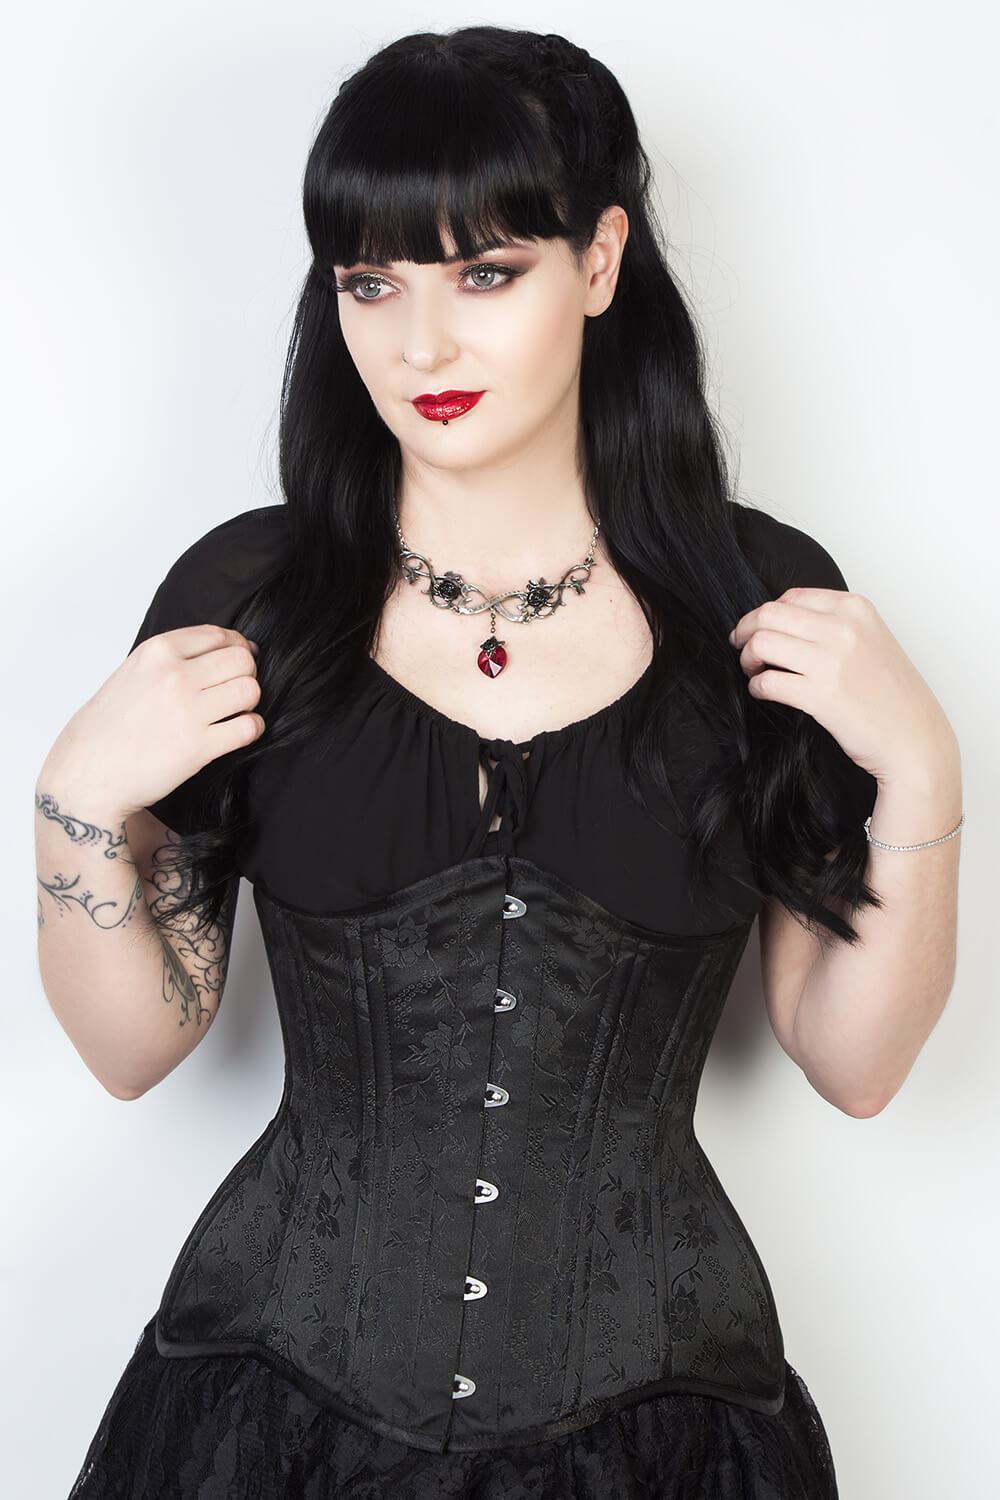 The best of designs of Custom Made Corsets & Black Corset available